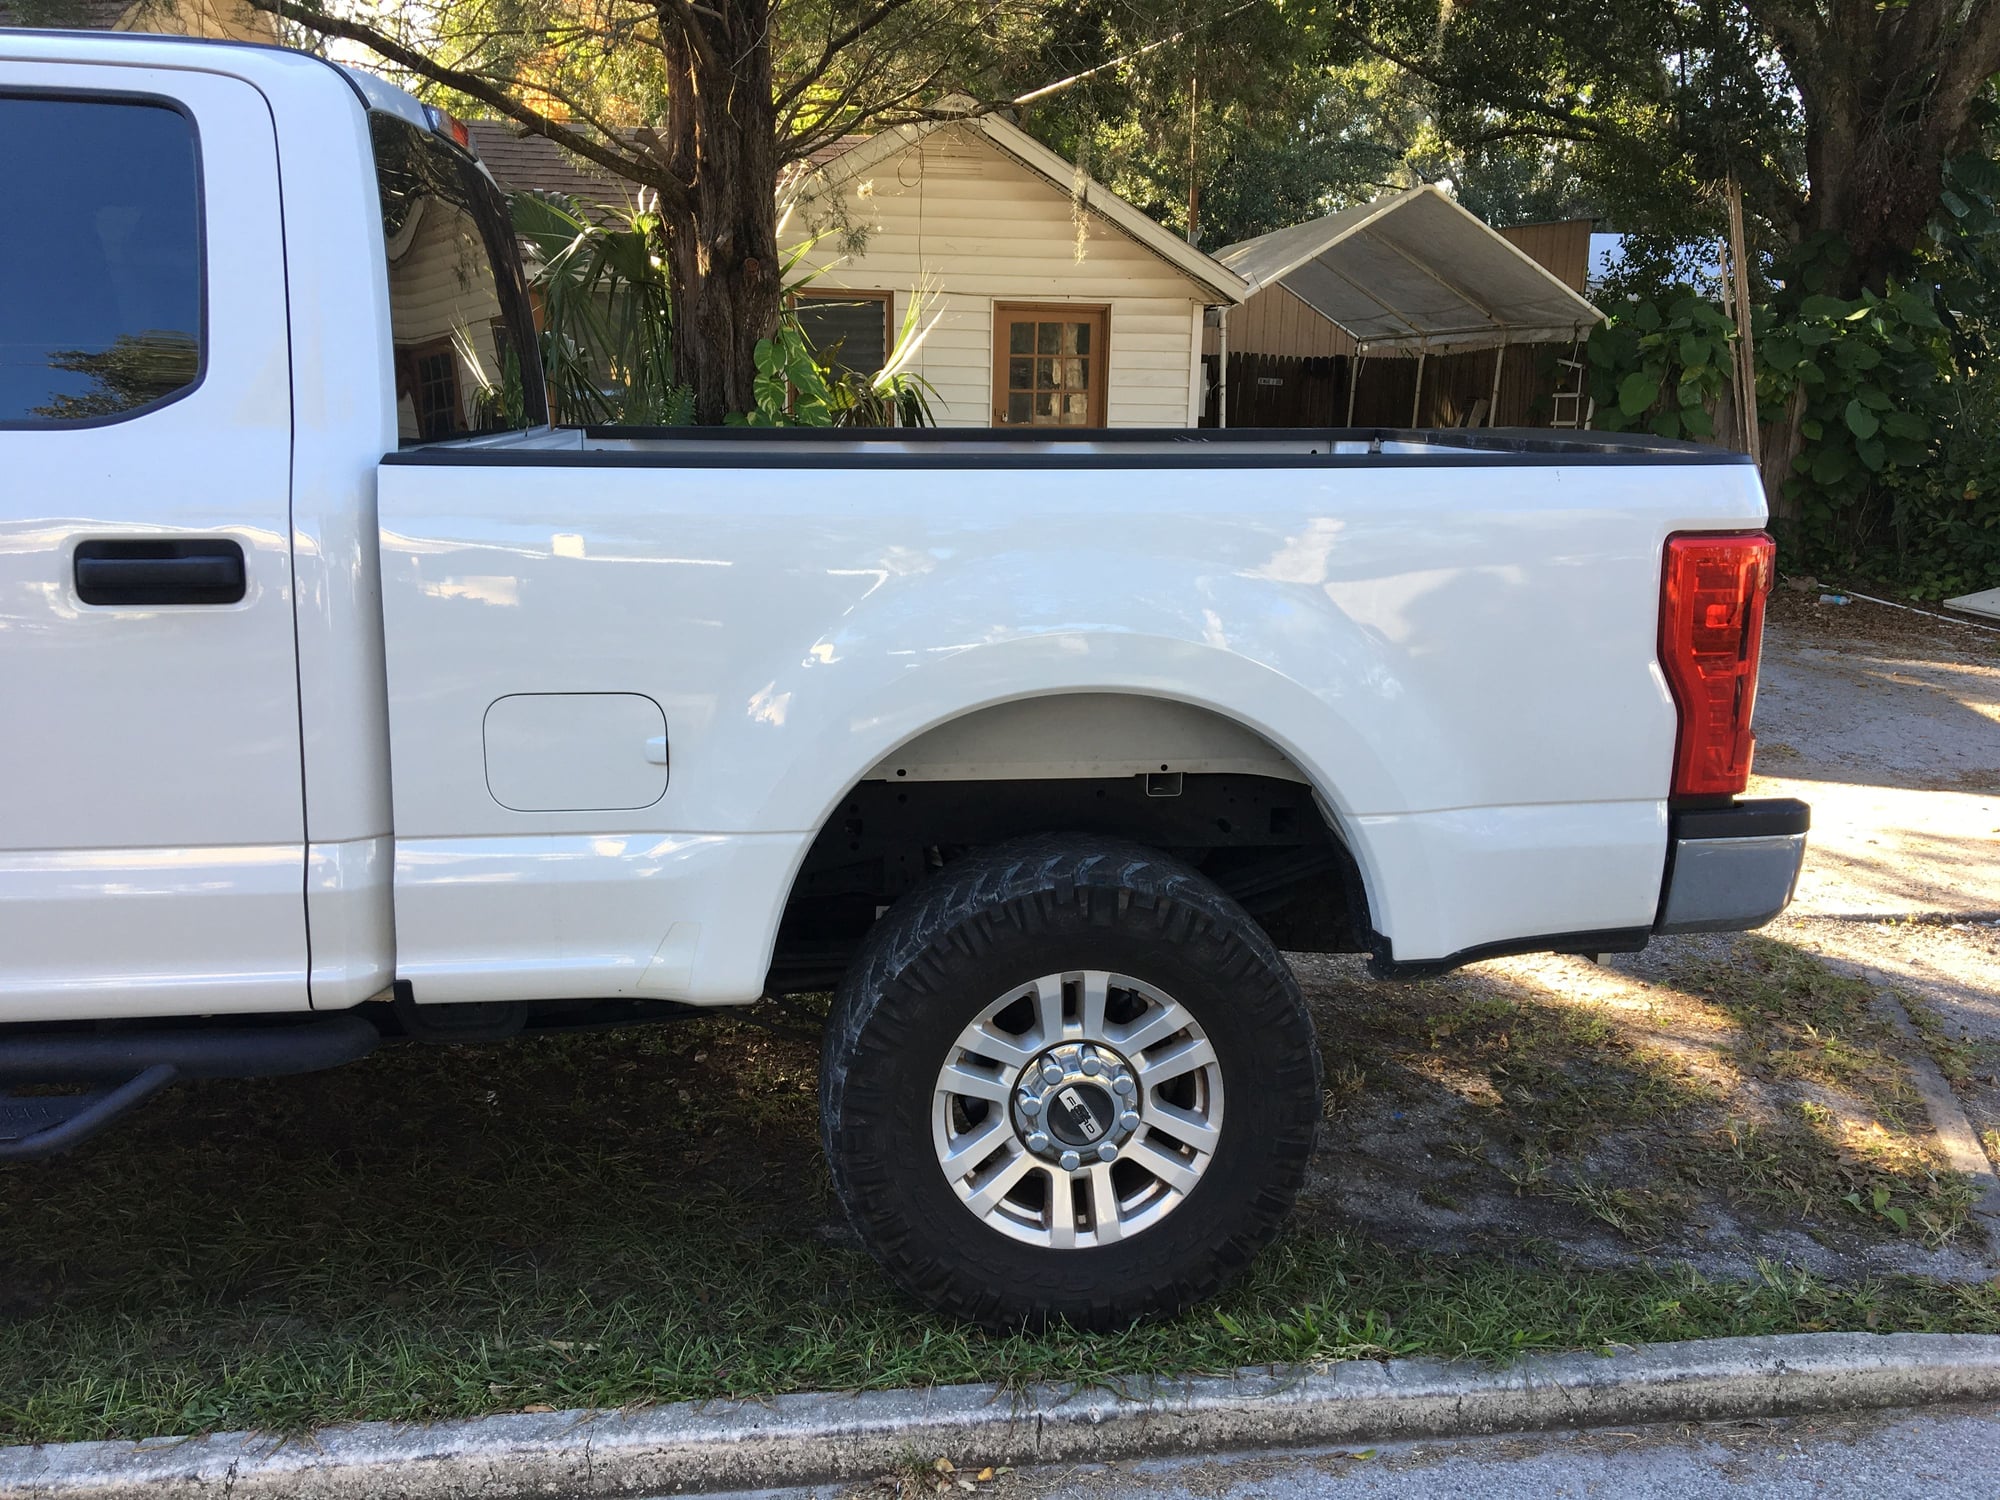 Exterior Body Parts - 2017 Superduty SHORT bed "takeoff" - Used - 2017 to 2019 Ford 3/4 Ton Pickup - Saint Petersburg, FL 33710, United States